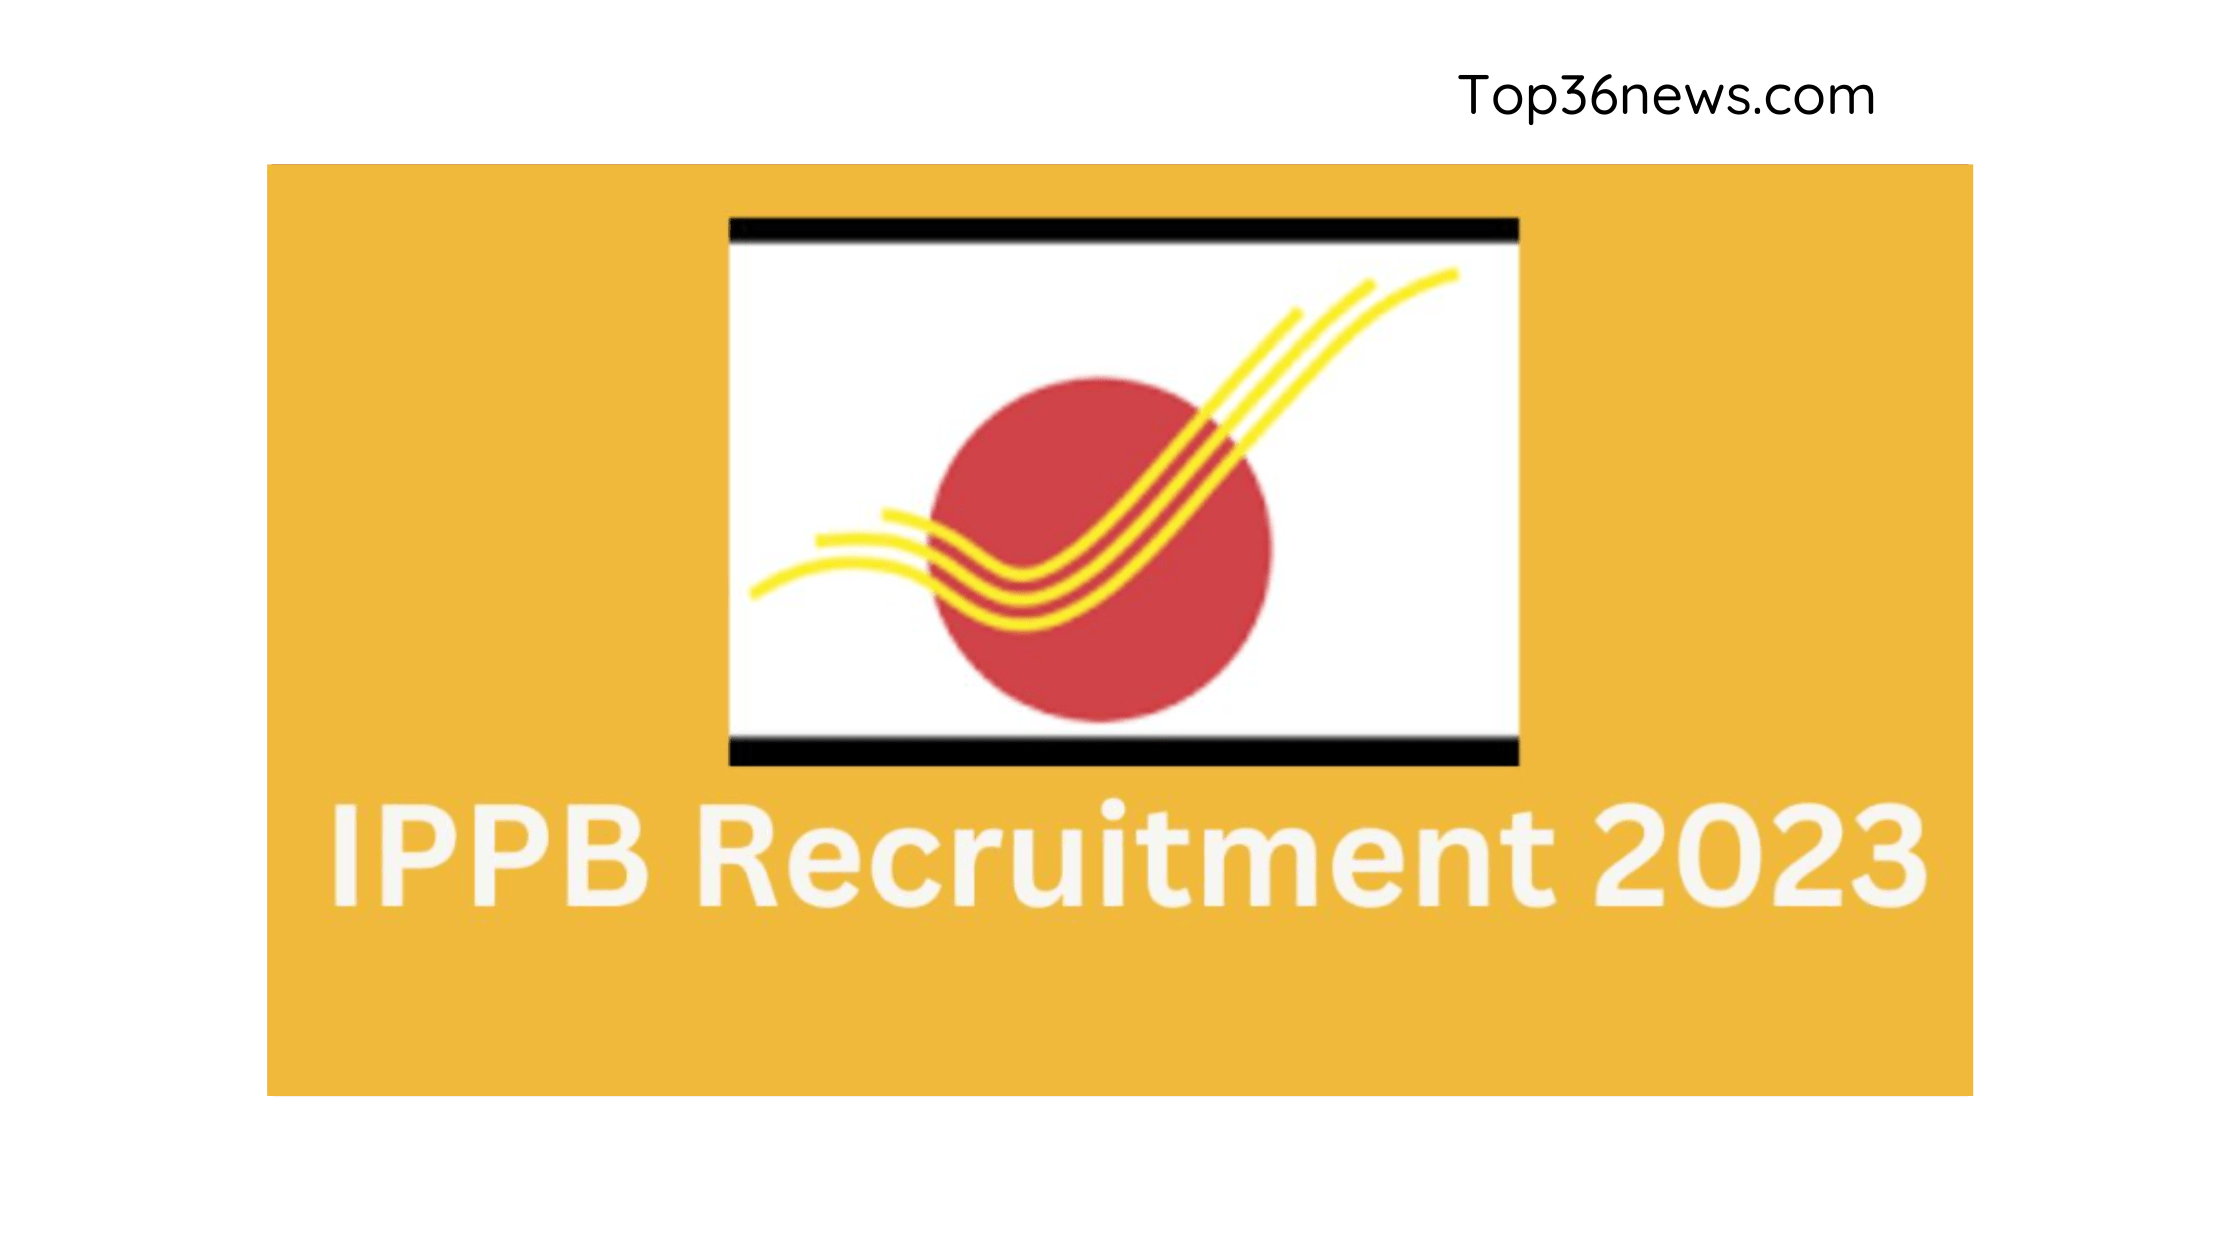 Ippb Recruitment 2023 apply online in india, for 132 Executive Posts